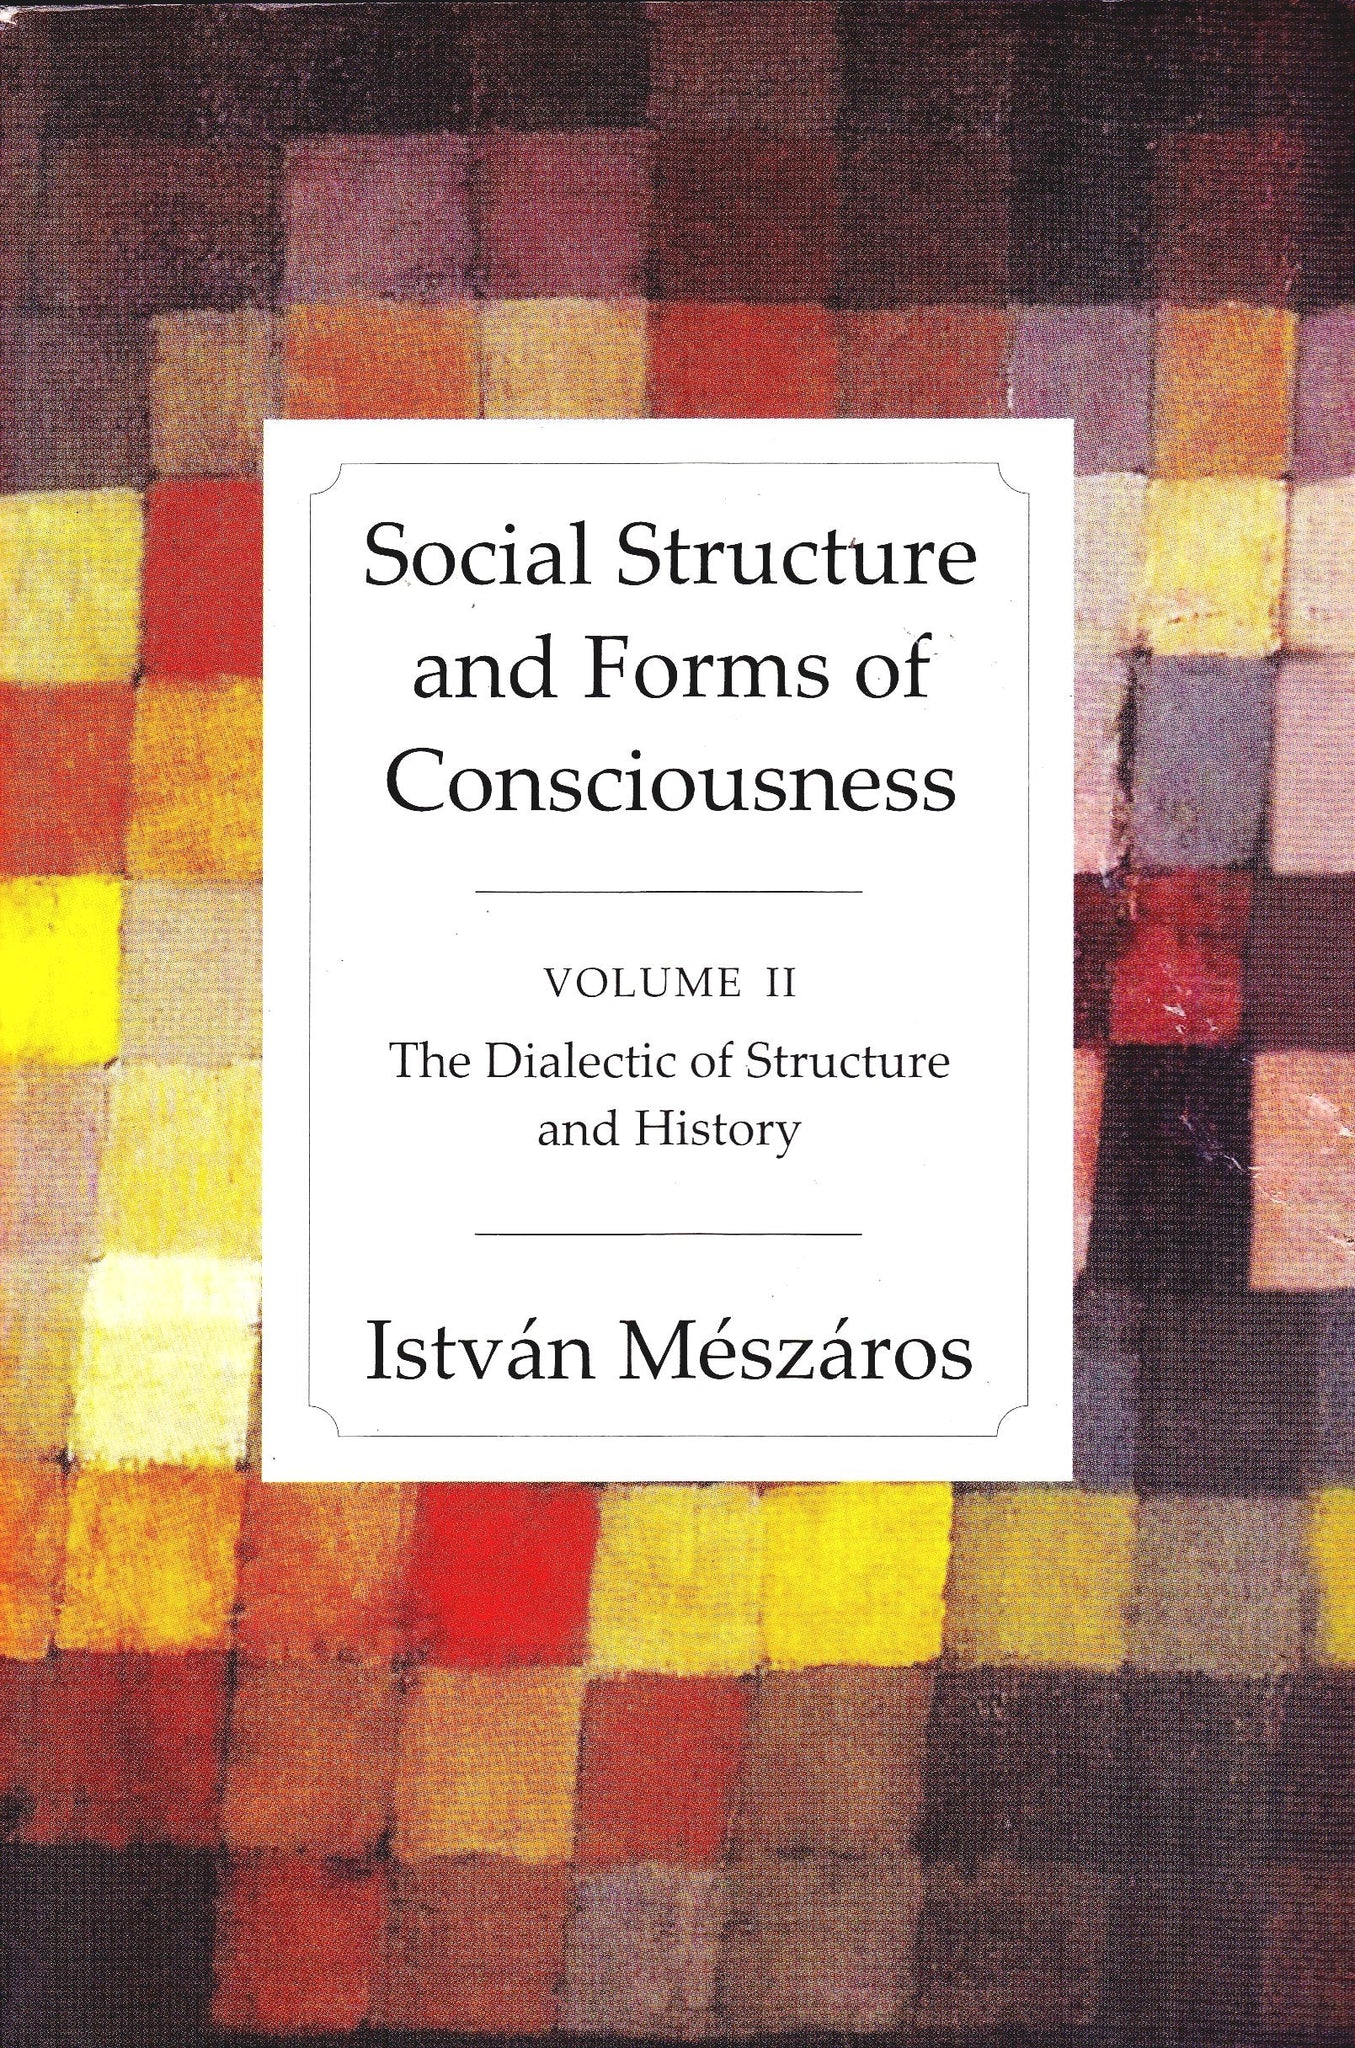 Social Structure and Forms of Consciousness: Vol. 2 - The Dialectic of Structure and History